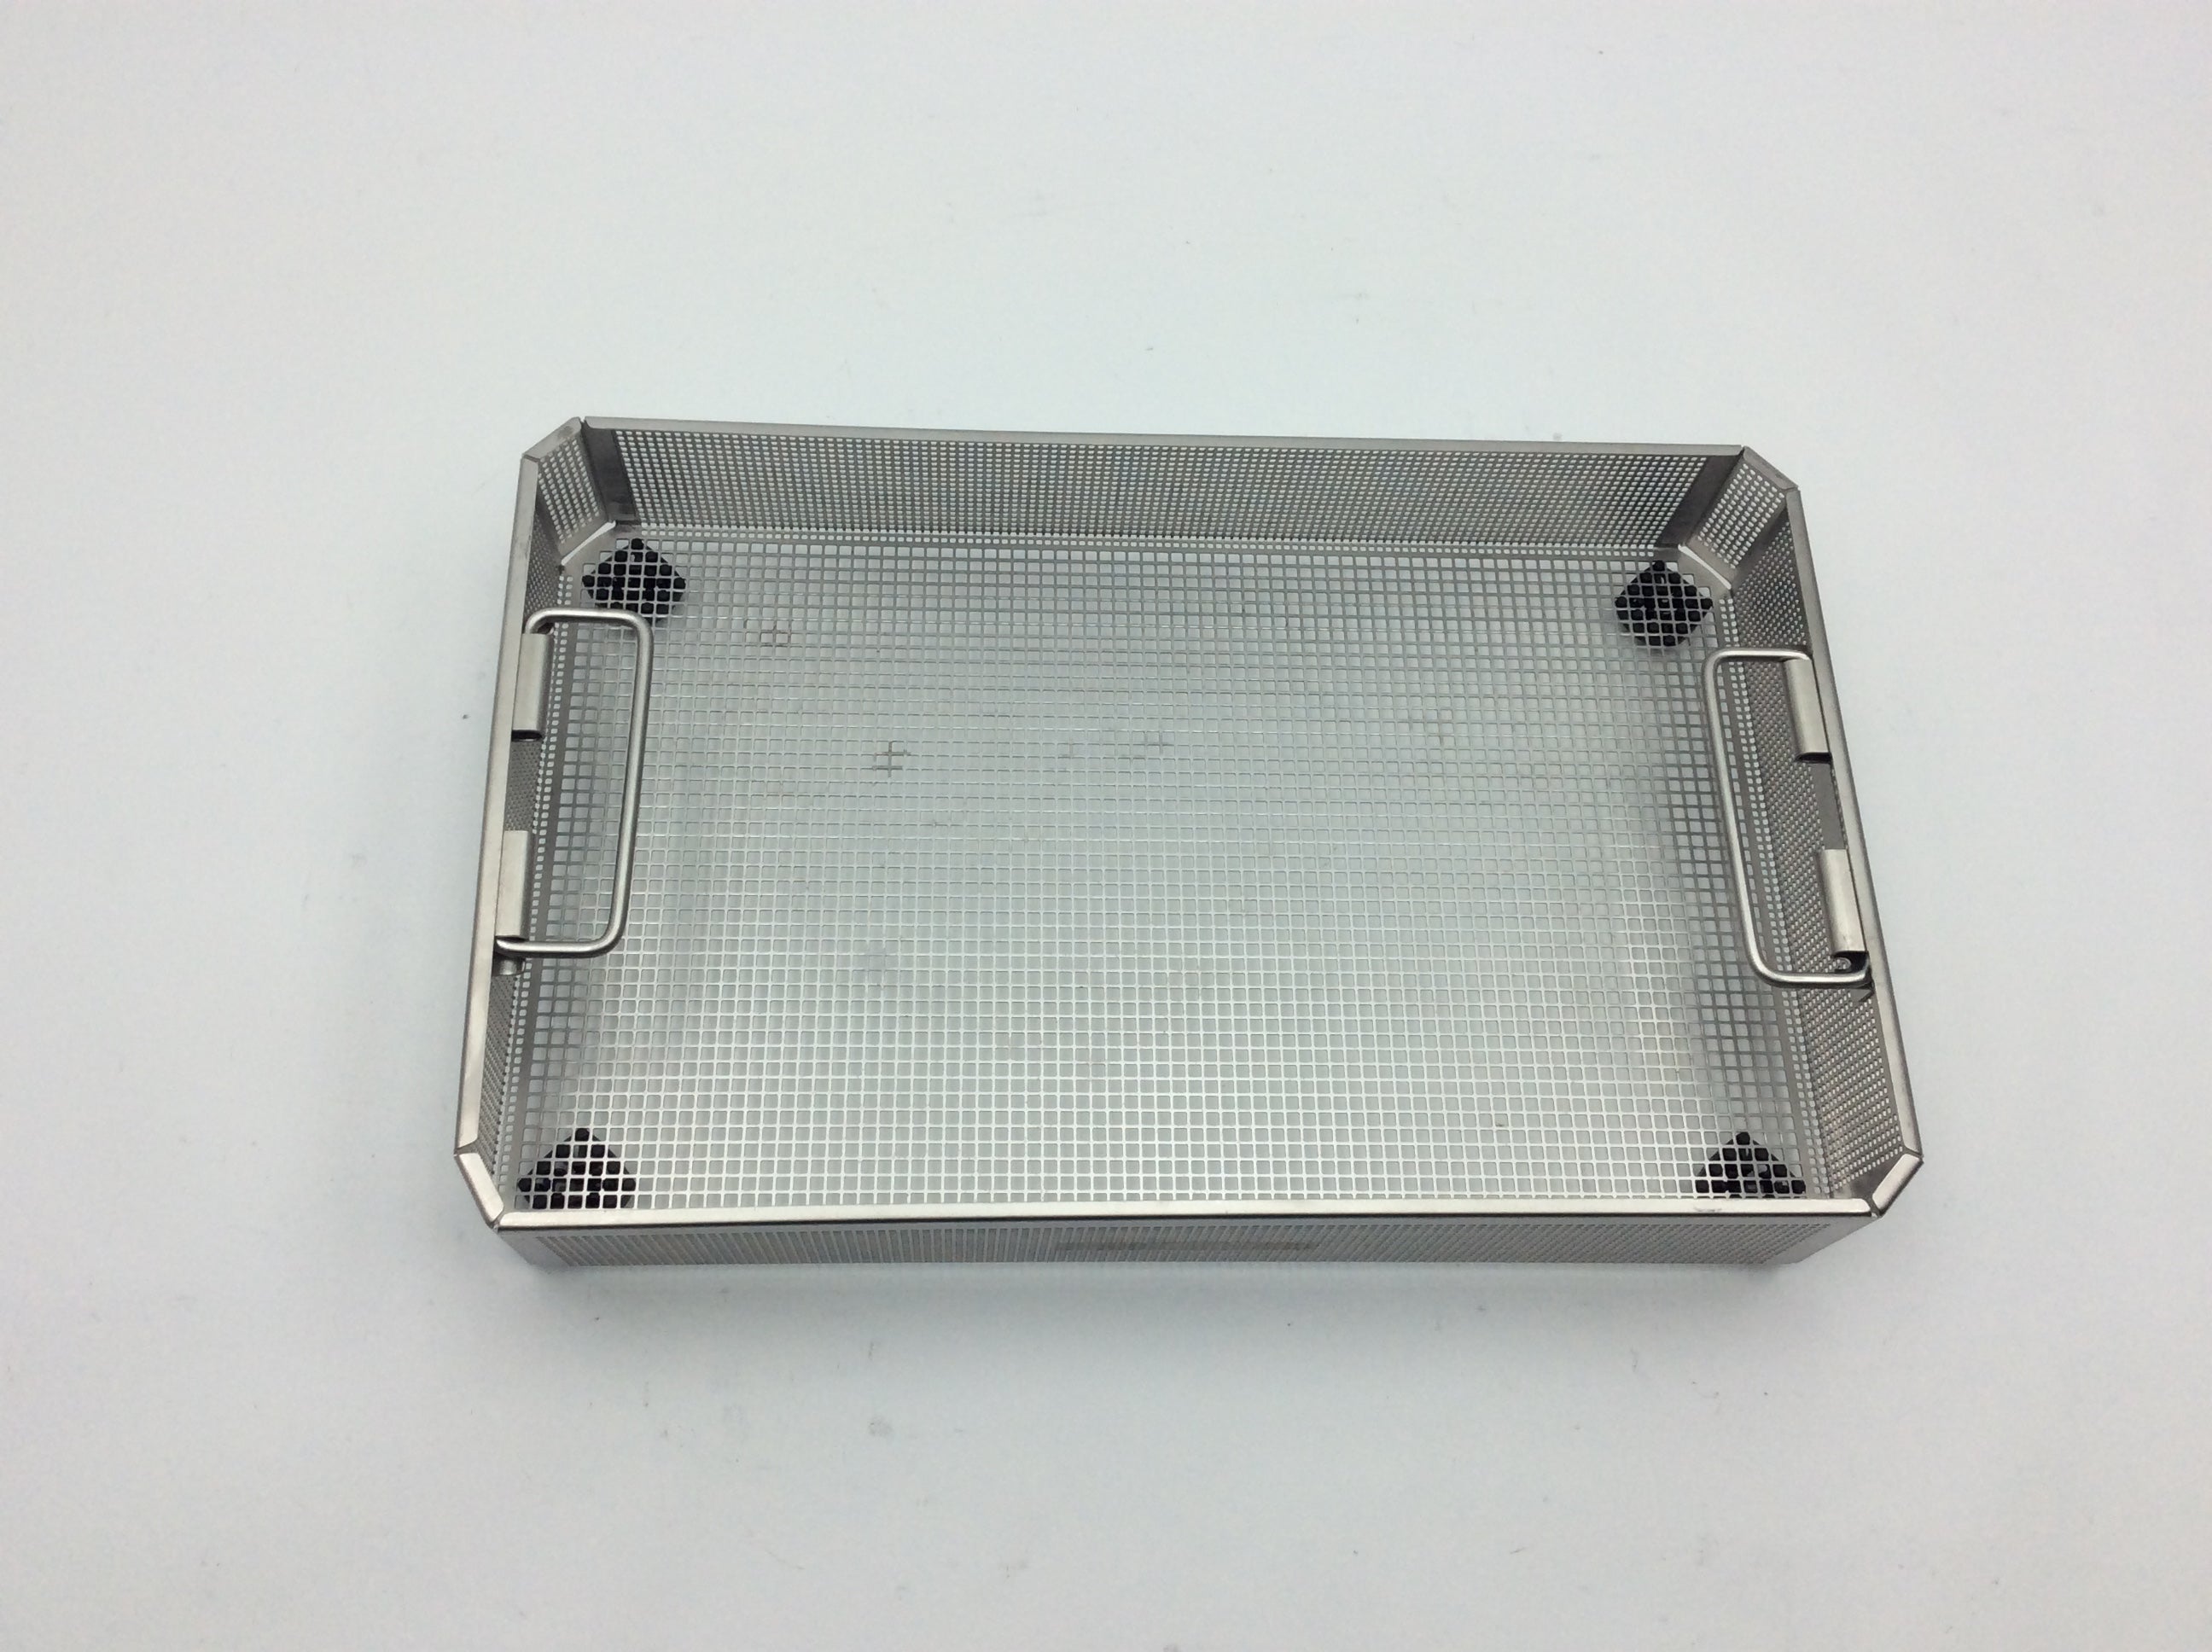 Load image into Gallery viewer, A Biomedical Service Aesculap JN742 Sterilization Case Surgical Medical w/ Jf253r Tray 255.00